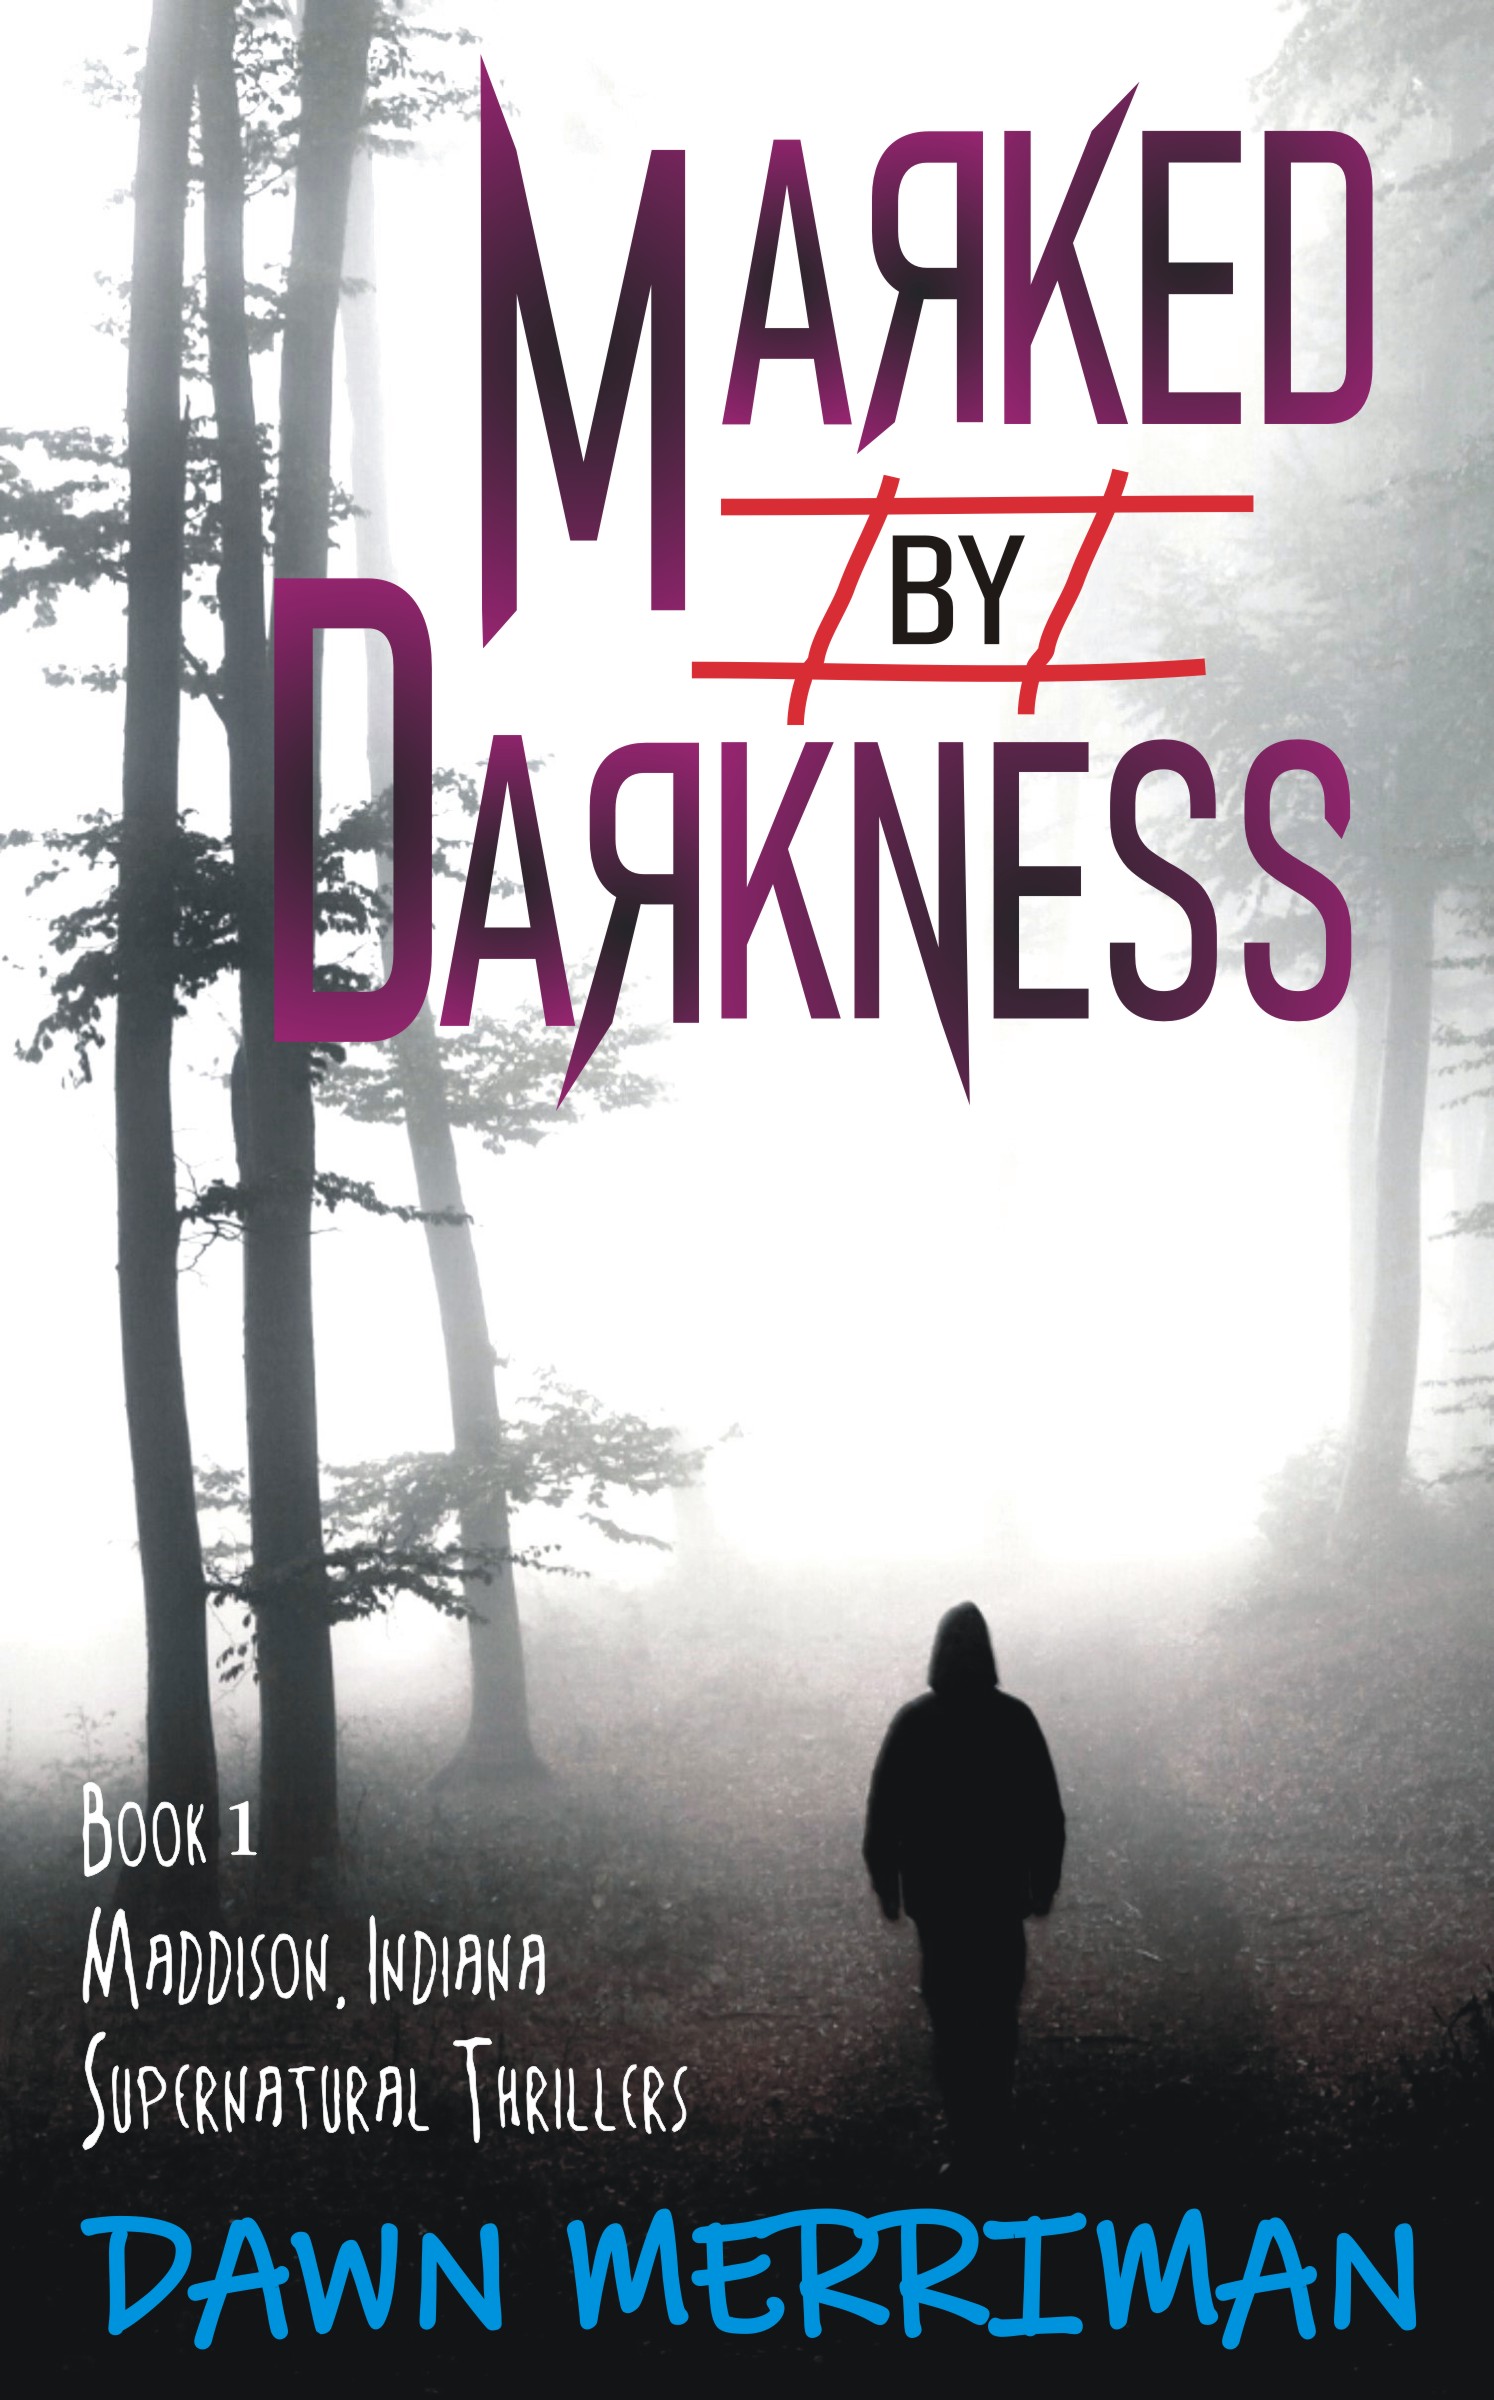 Cover of novel Marked by Darkness by Dawn Merriman